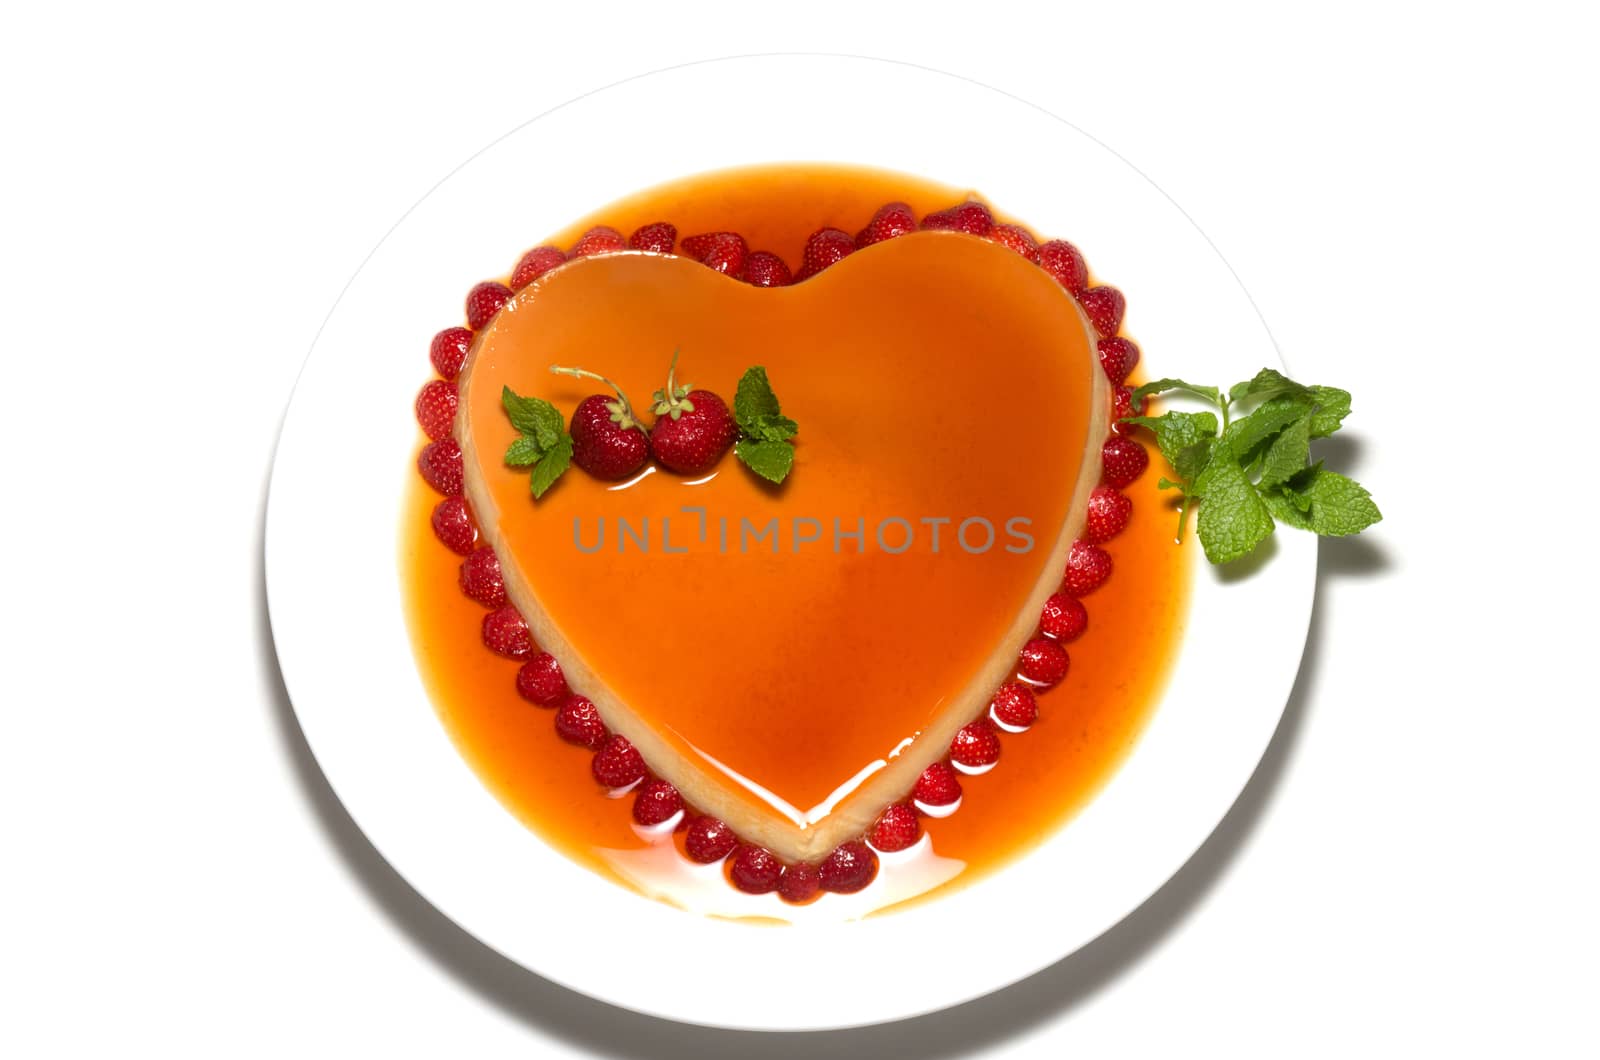 Heart shape flan caramel with strawberries and mint leaves by daoleduc